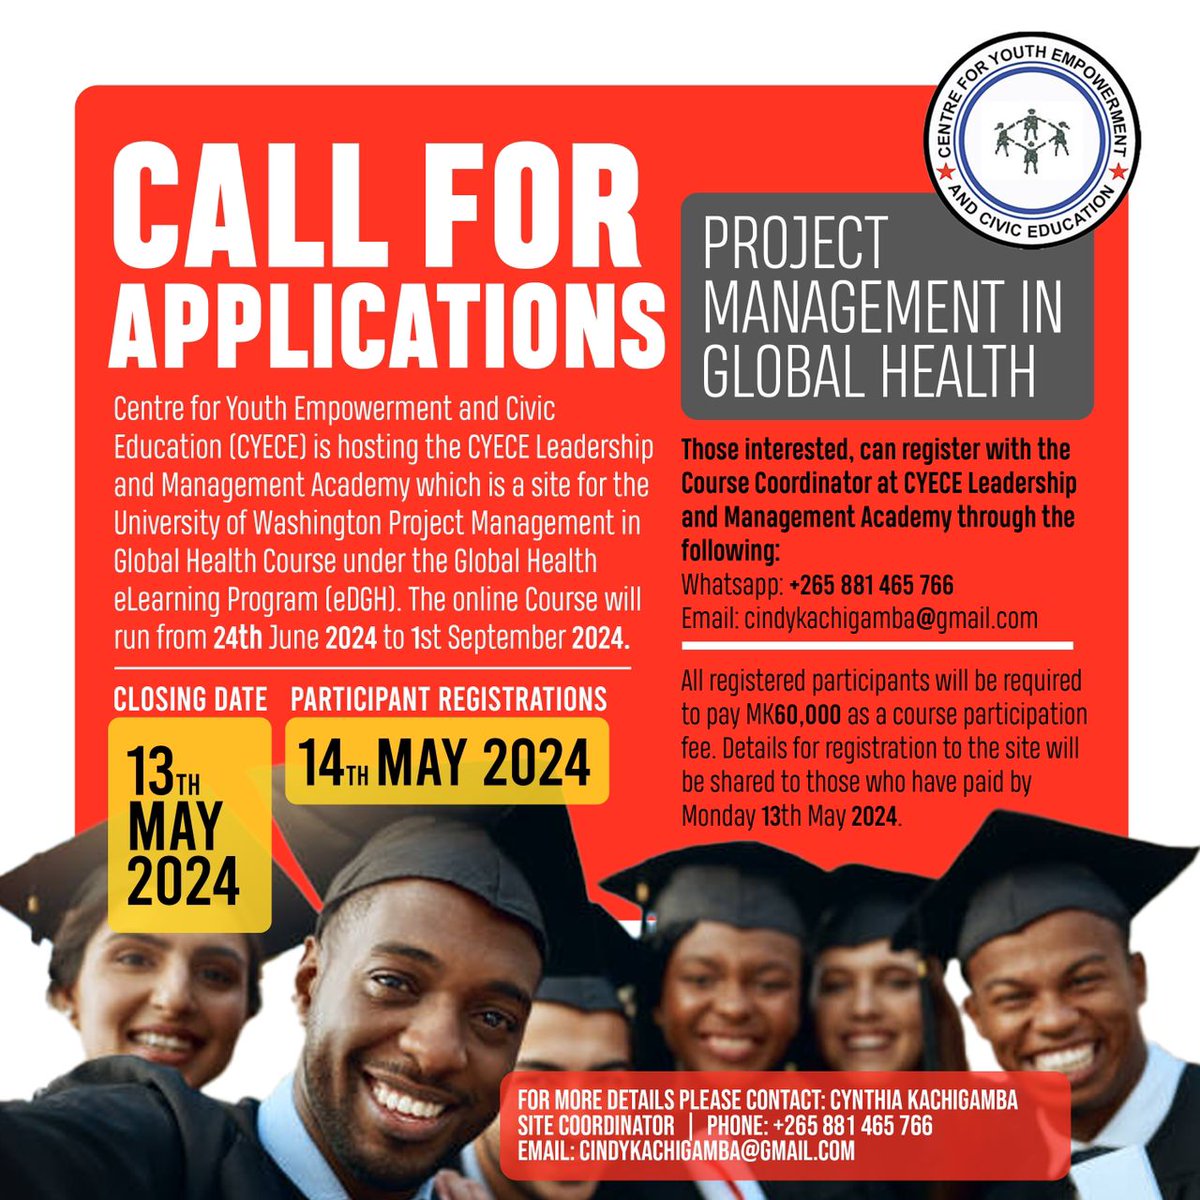 CALL FOR APPLICATIONS- PROJECT MANAGEMENT IN GLOBAL HEALTH We are hosting the CYECE Leadership and Management Academy which is a site for the University of Washington Project Management in Global Health Course under the Global Health eLearning Program (eDGH).